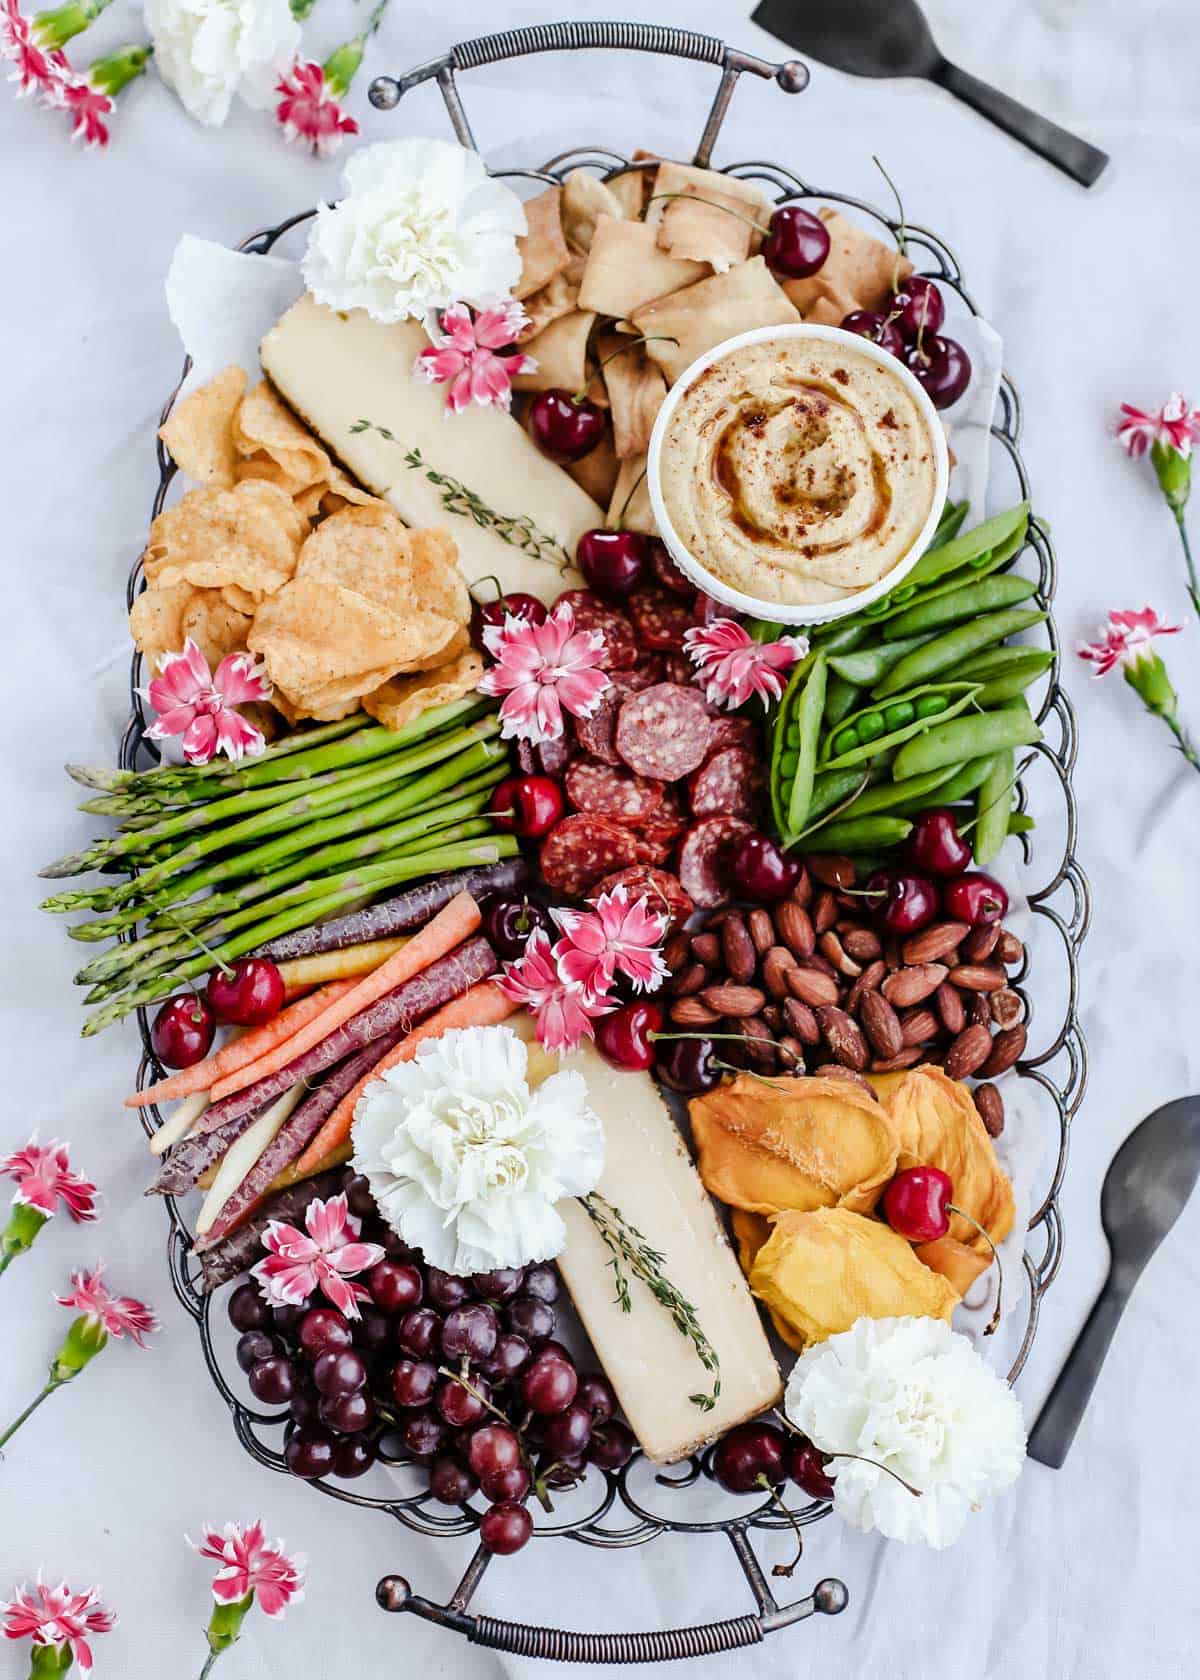 How To Turn A Cheese Board Into A Meal